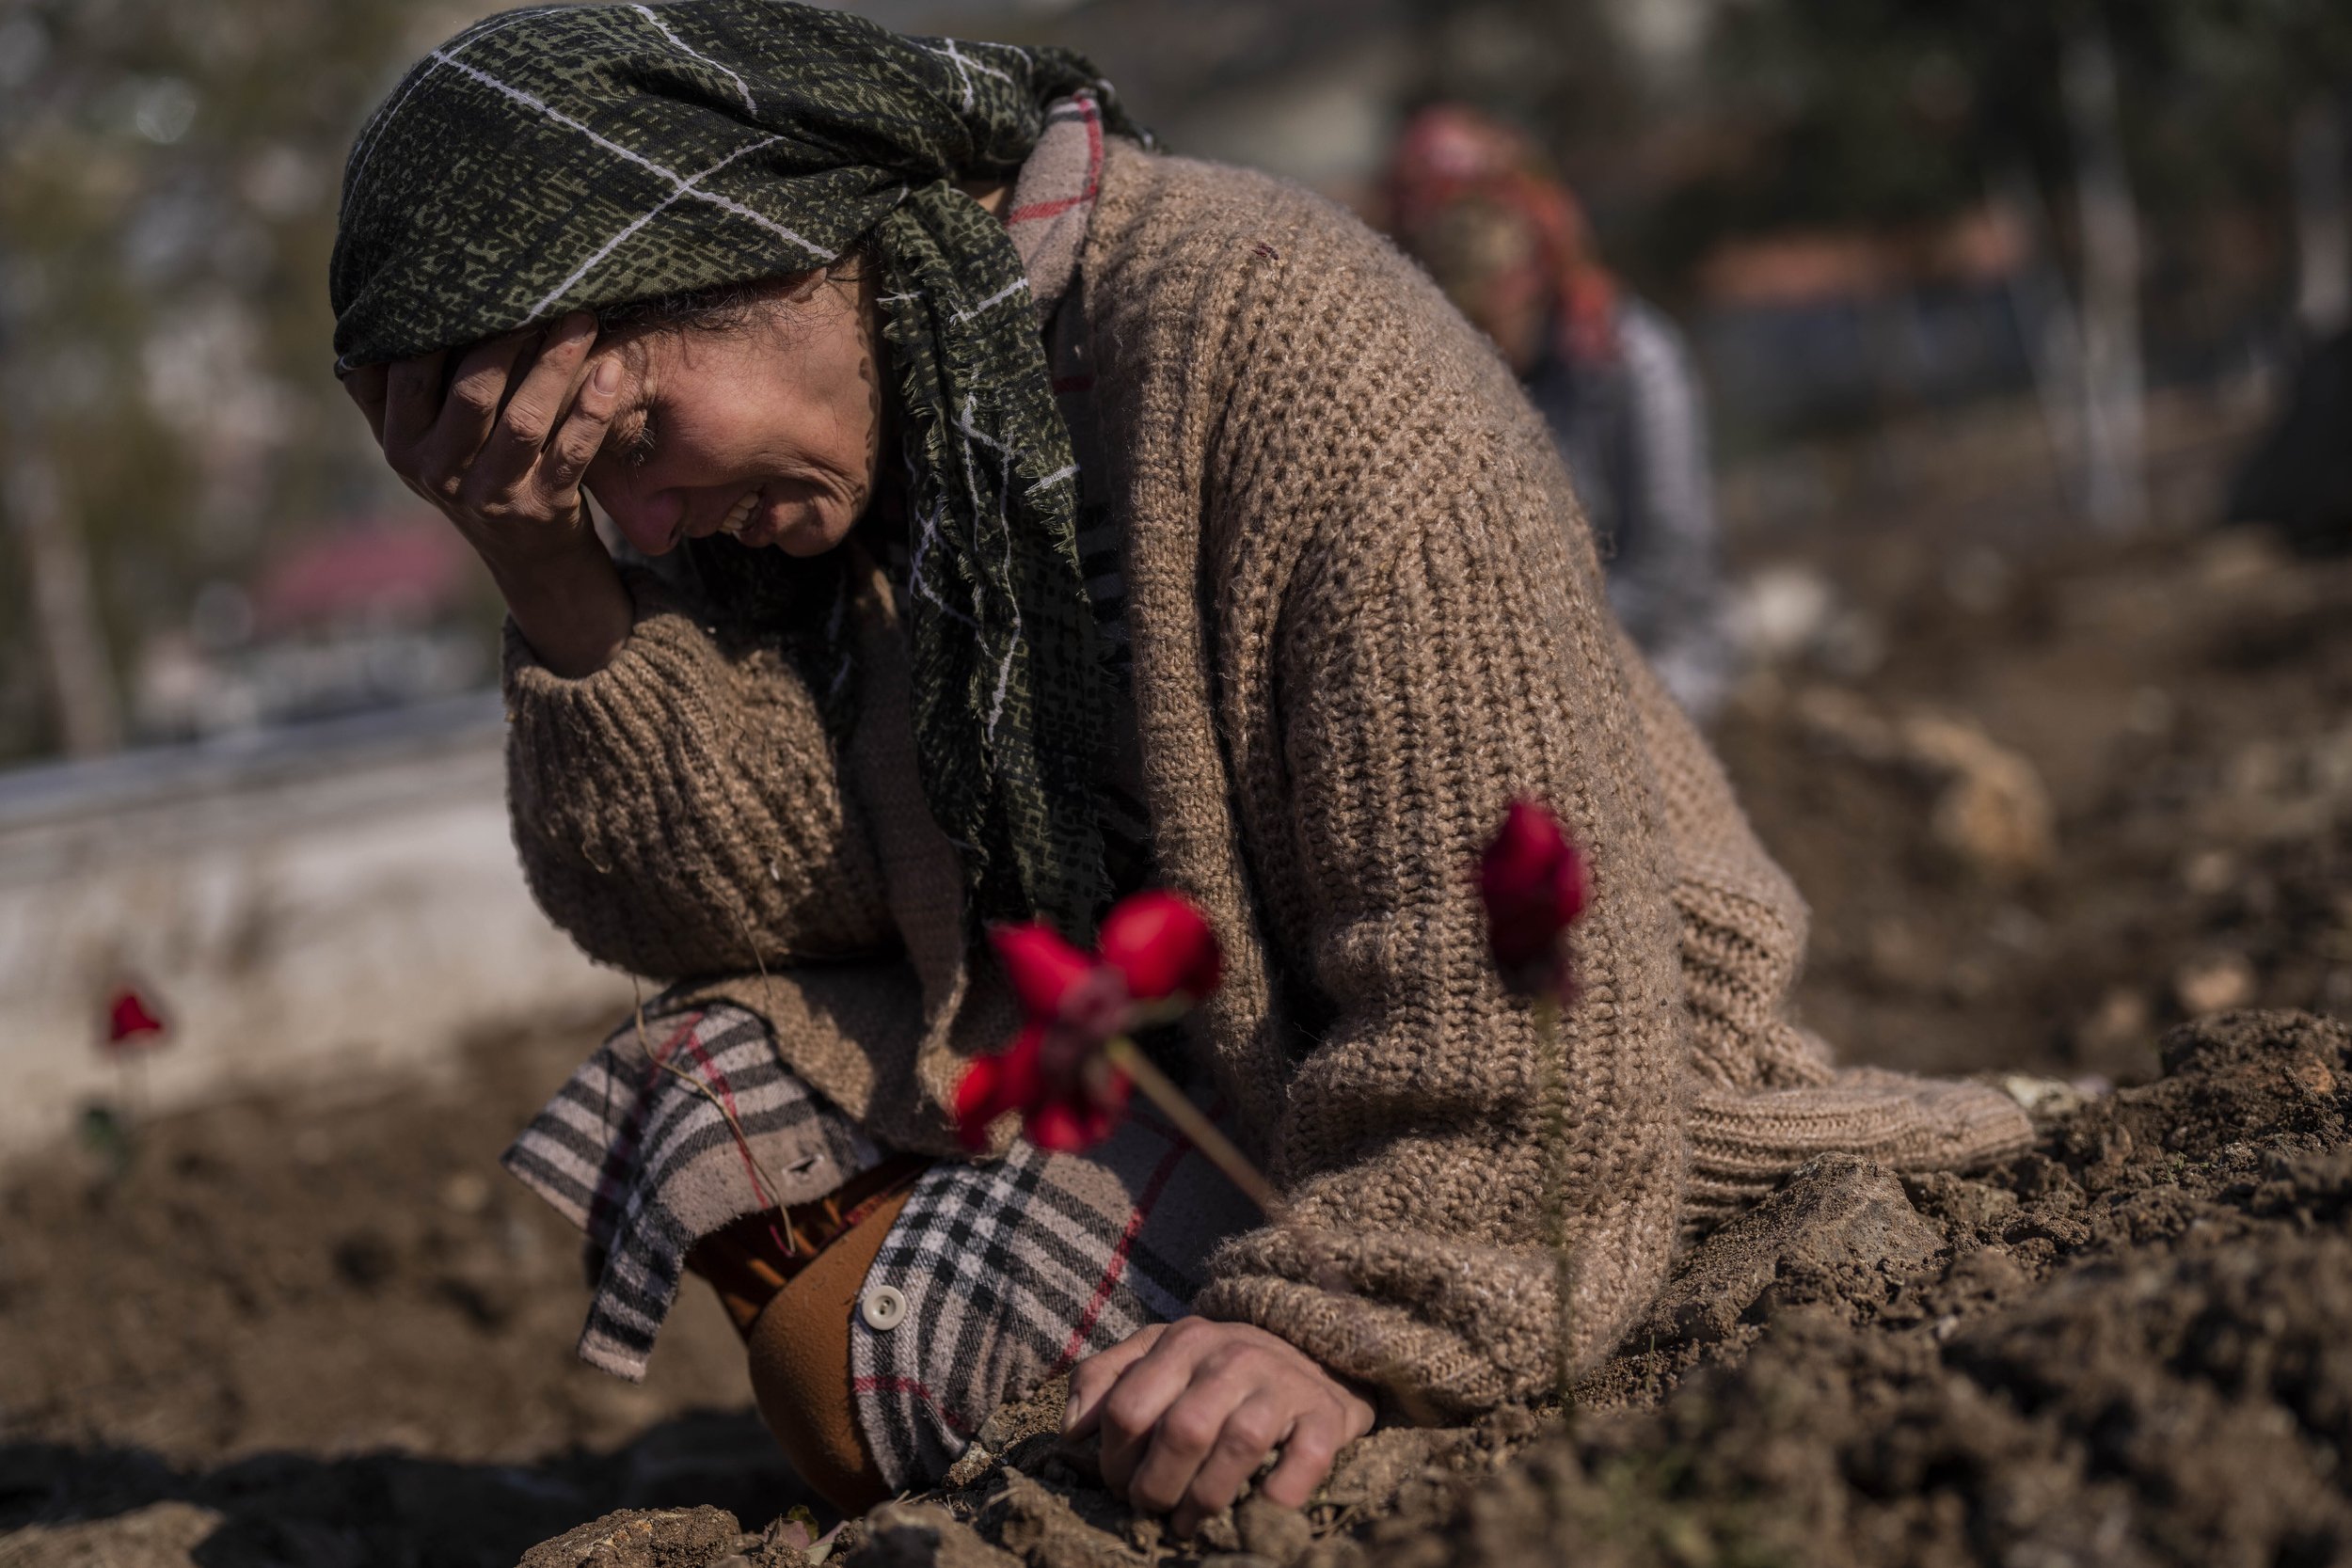  A member of the Vehibe family mourns following the burial of her relative who was killed when a powerful earthquake struck the border region of Turkey and Syria, in Antakya, southeastern Turkey, on Feb. 11, 2023. (AP Photo/Bernat Armangue) 